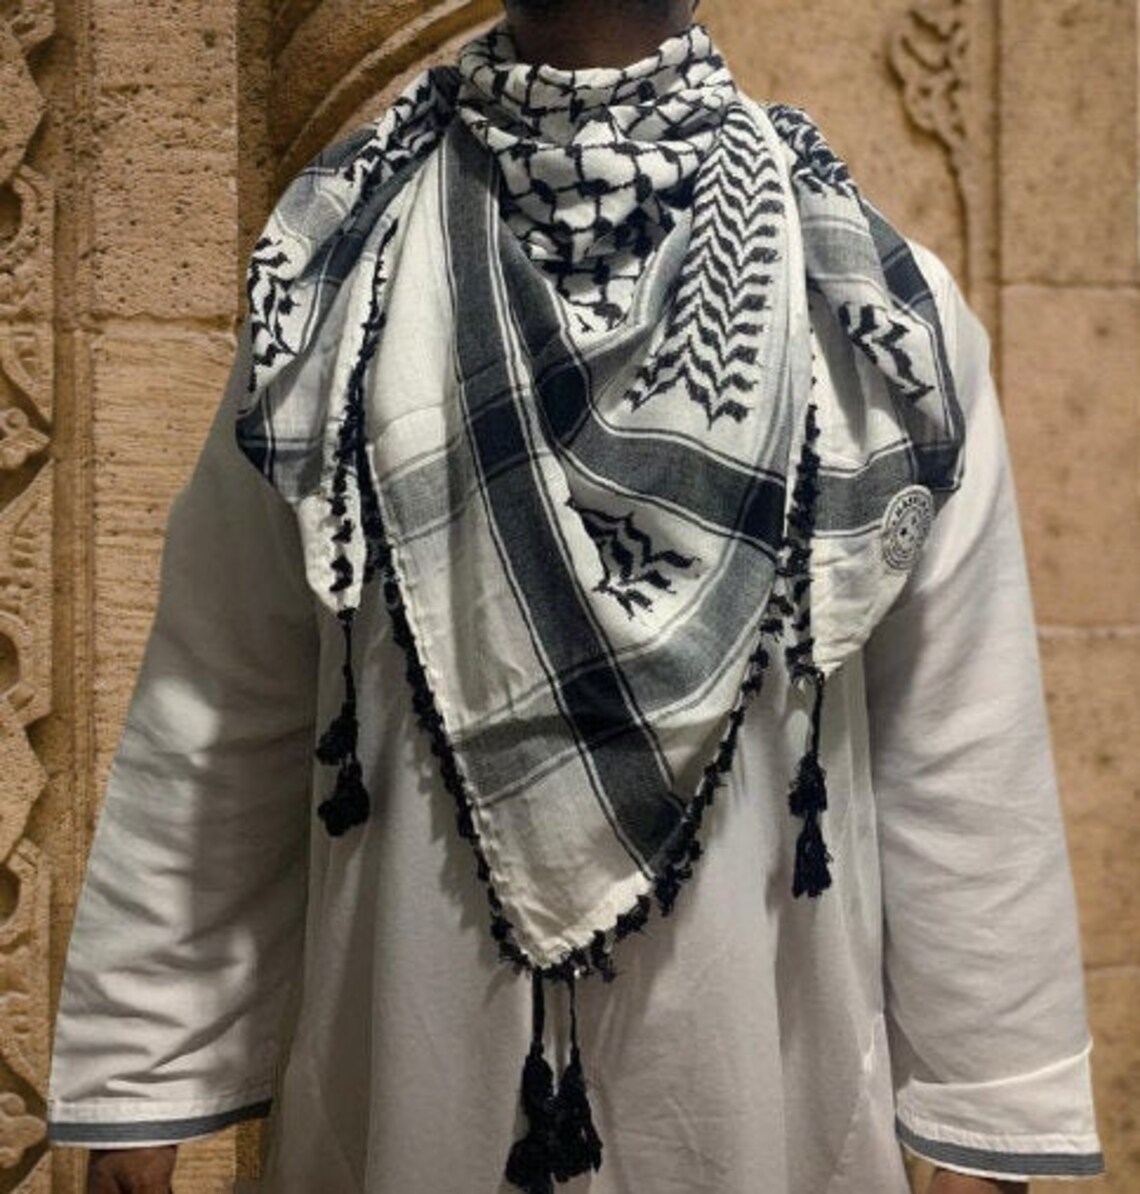 Palestine Black and White Keffiyeh Scarf With Black Tassel's for Winter ...